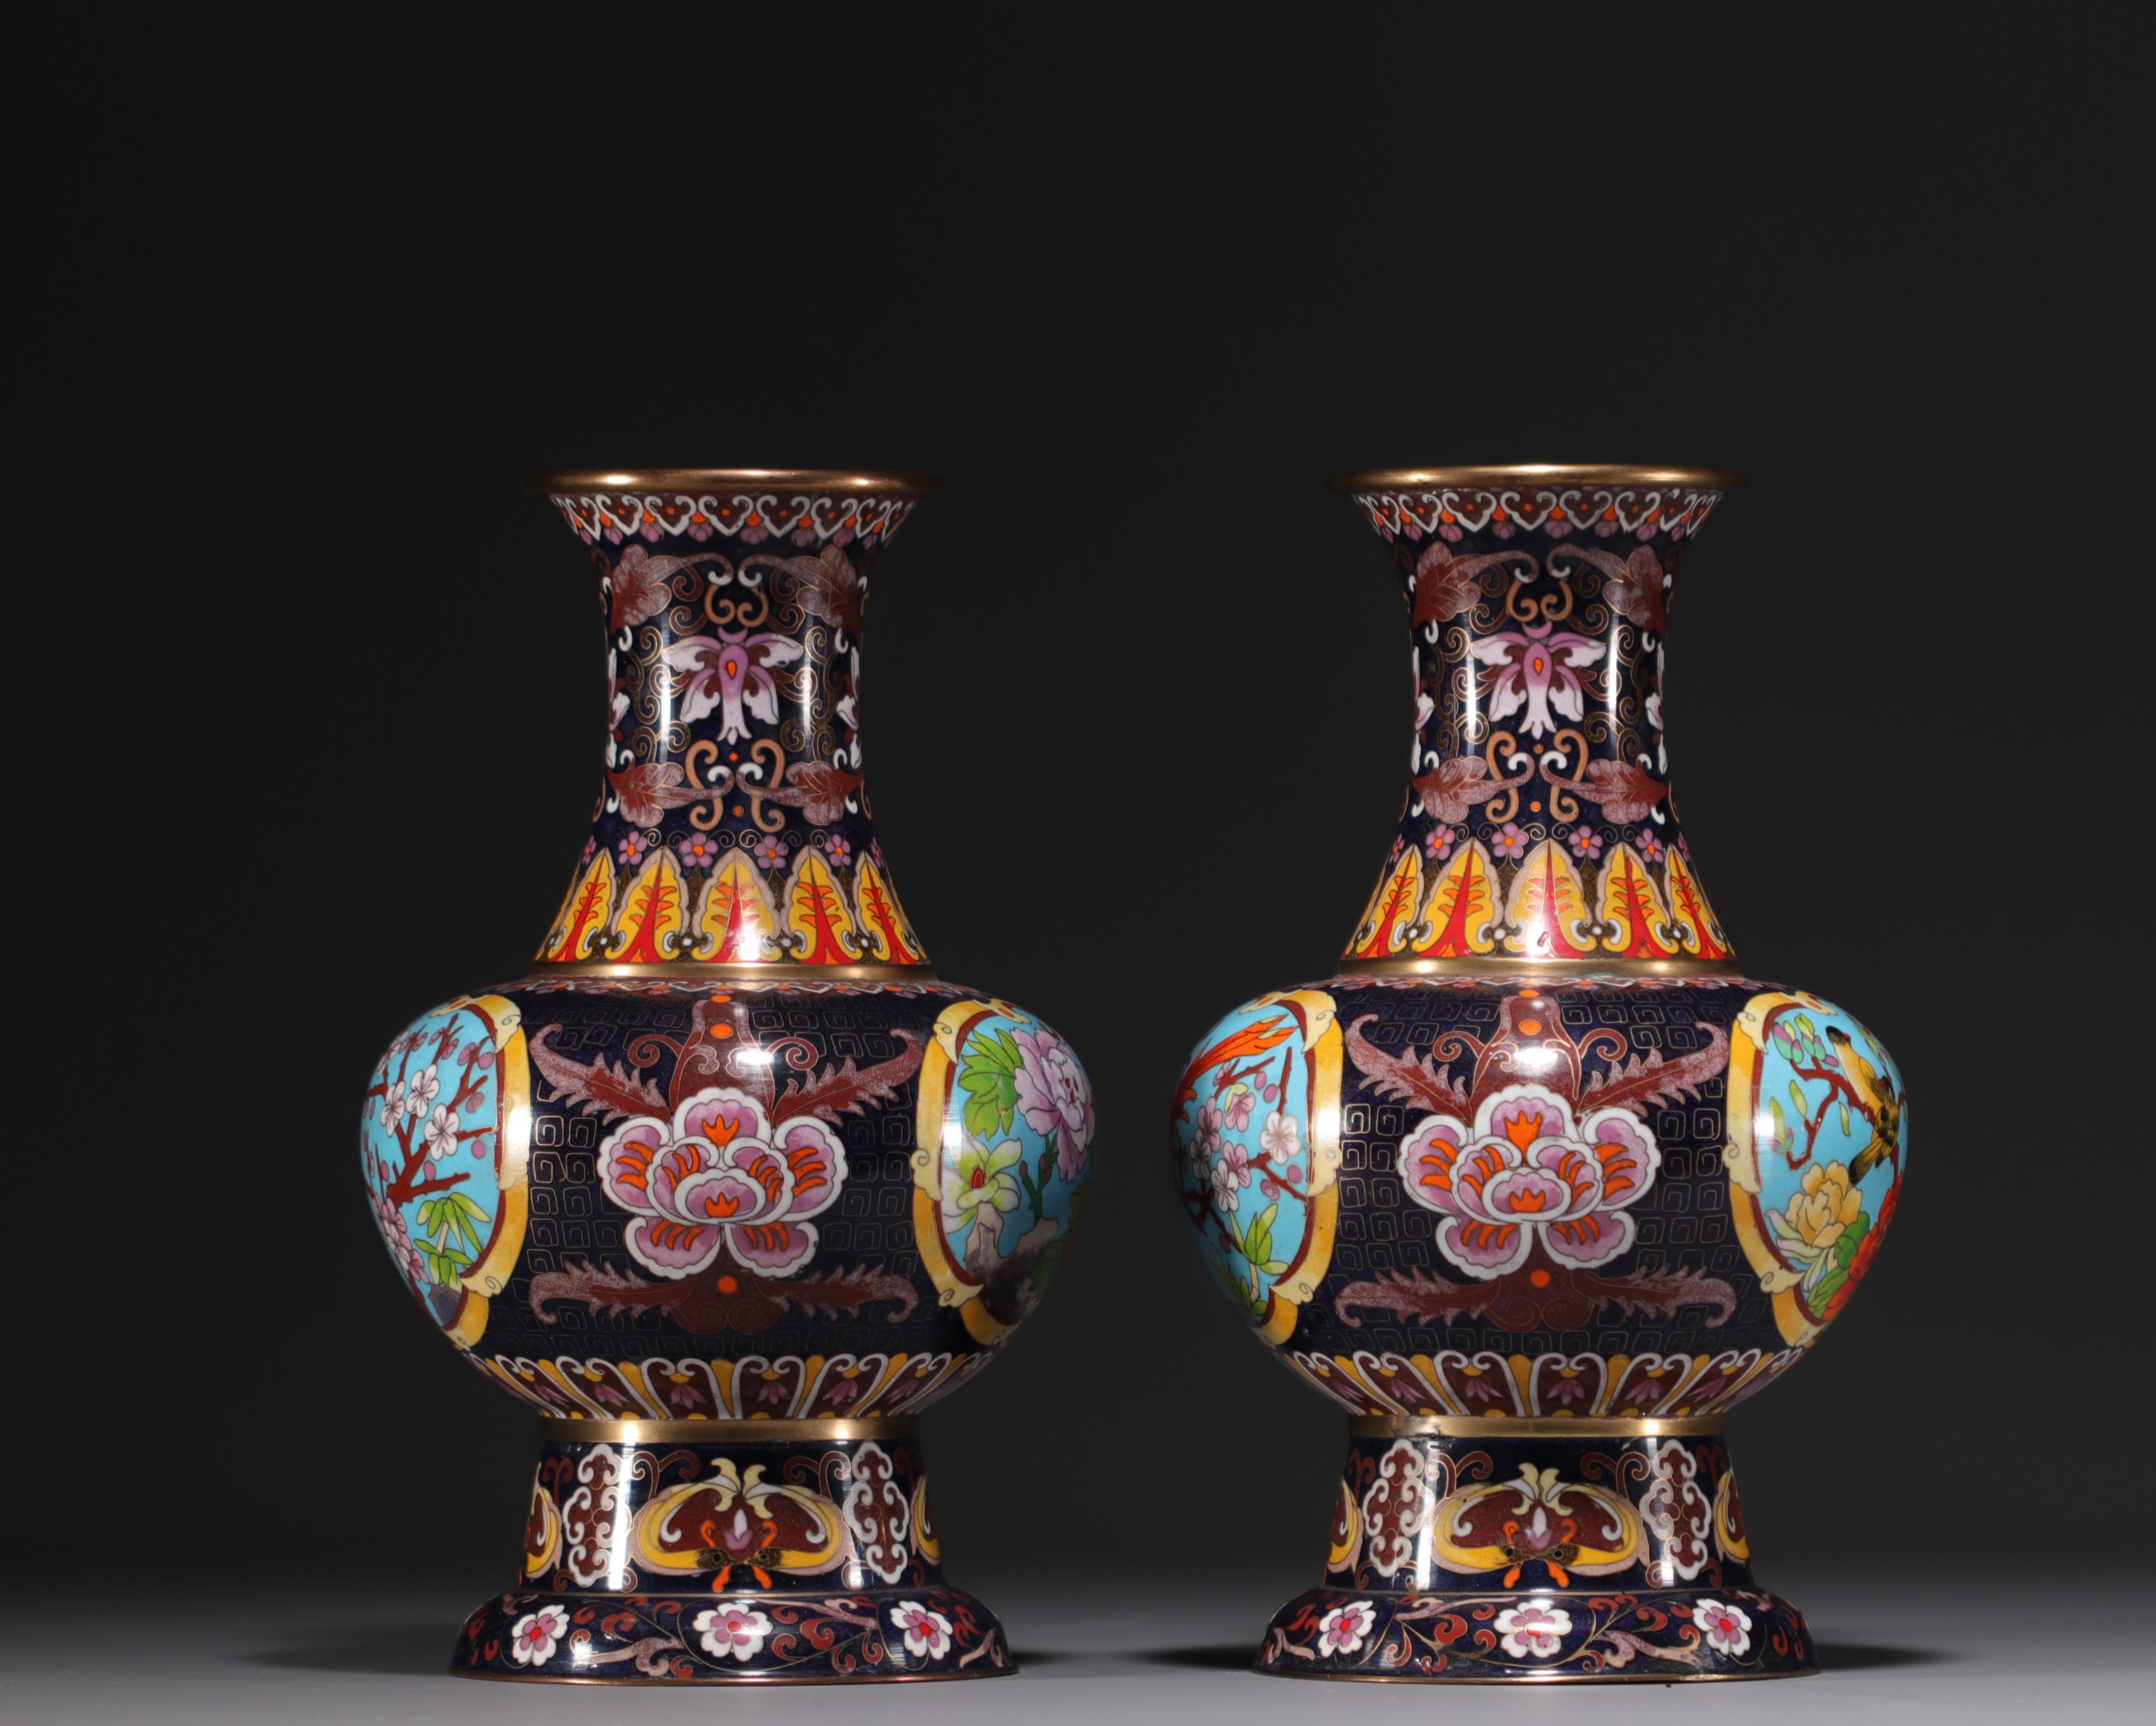 China - A pair of cloisonne enamel vases decorated with flowers and birds, 20th century. - Image 2 of 4